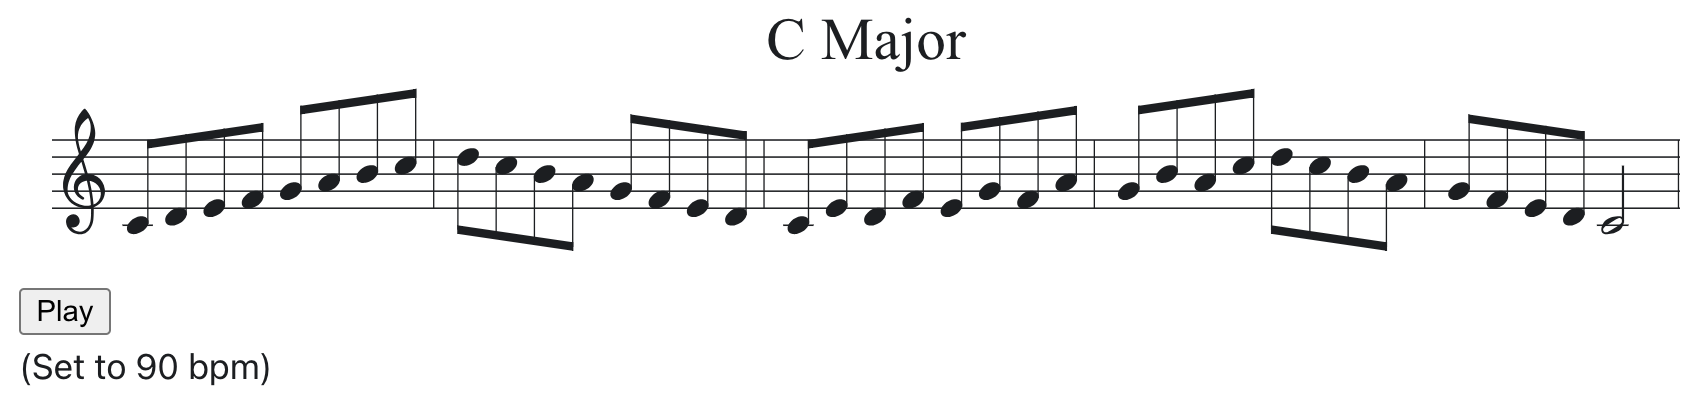 C scale notation example